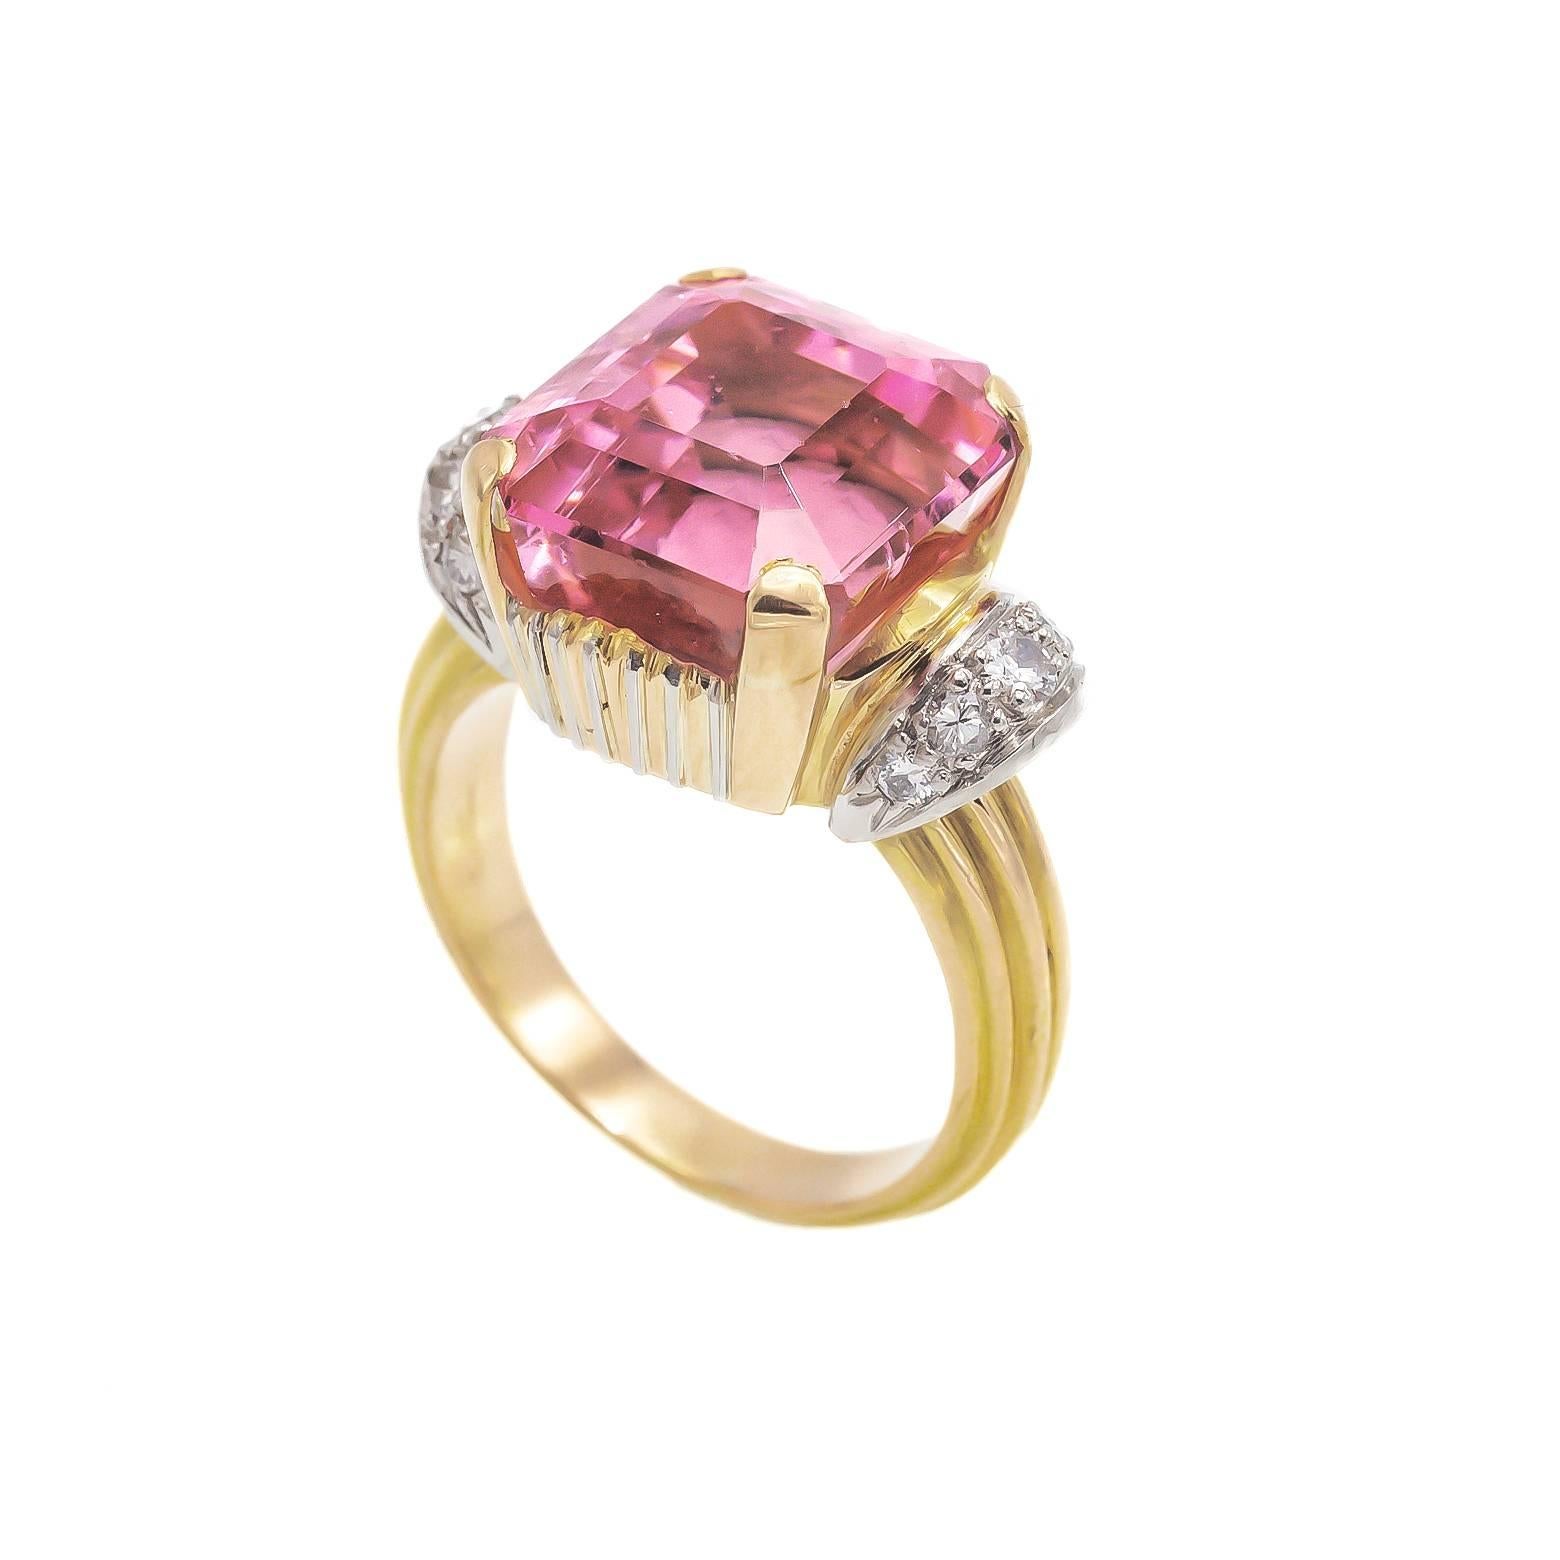 Modernist  Pink Tourmaline Aprox. 11ct Ring with Accent Diamonds Iconic of the 1950's